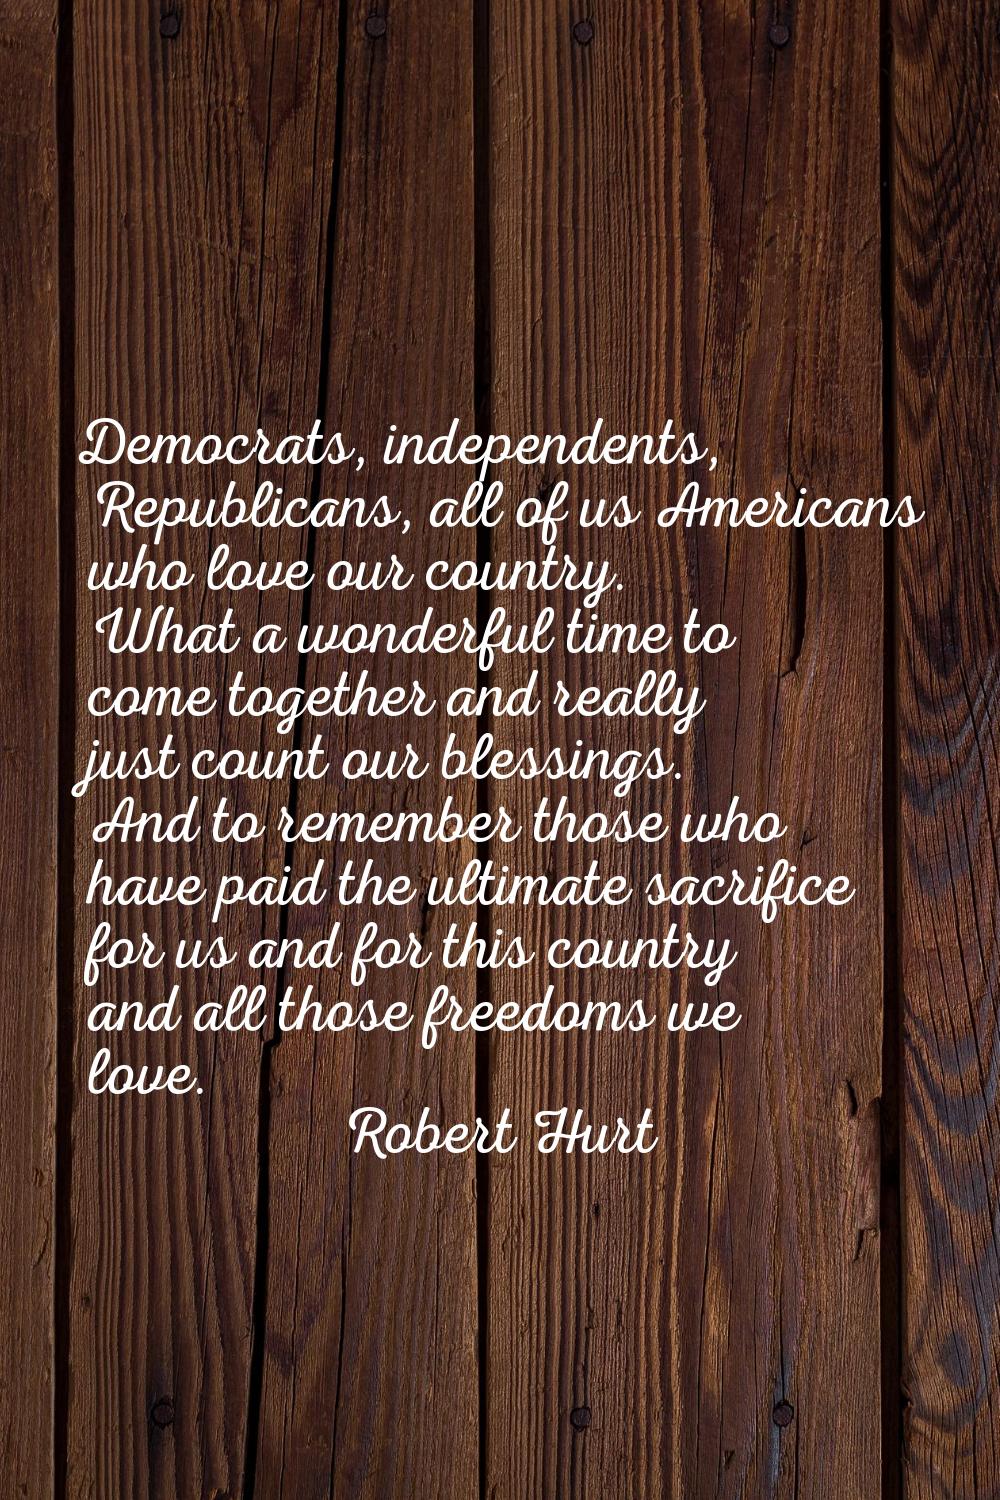 Democrats, independents, Republicans, all of us Americans who love our country. What a wonderful ti